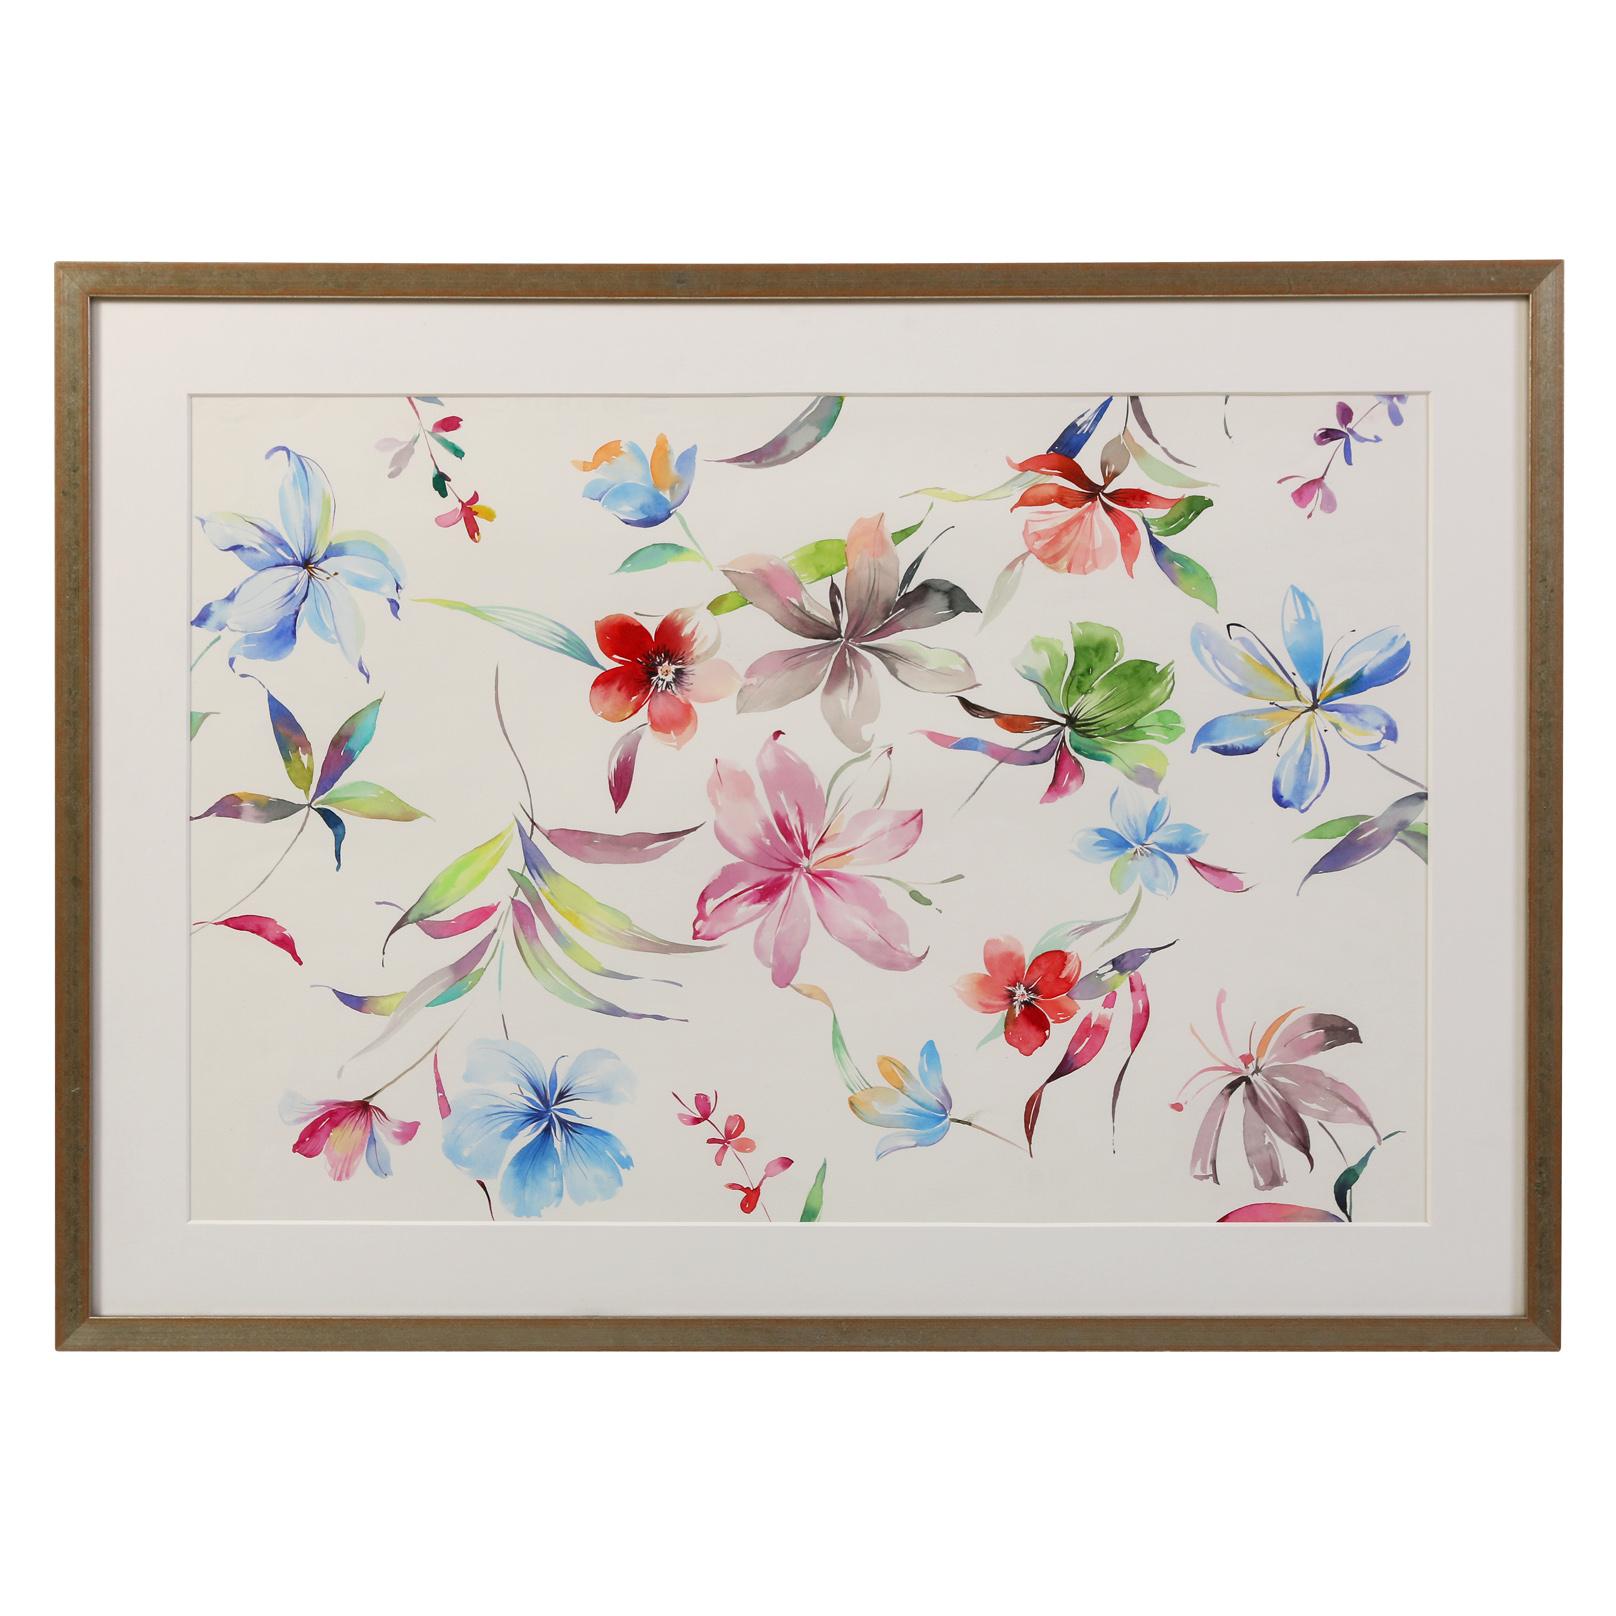 An original water color painting of flowers in stunning colors on a white, open background. Finished in a simple mat and gold and silver frame, the painting has great flow and movement.